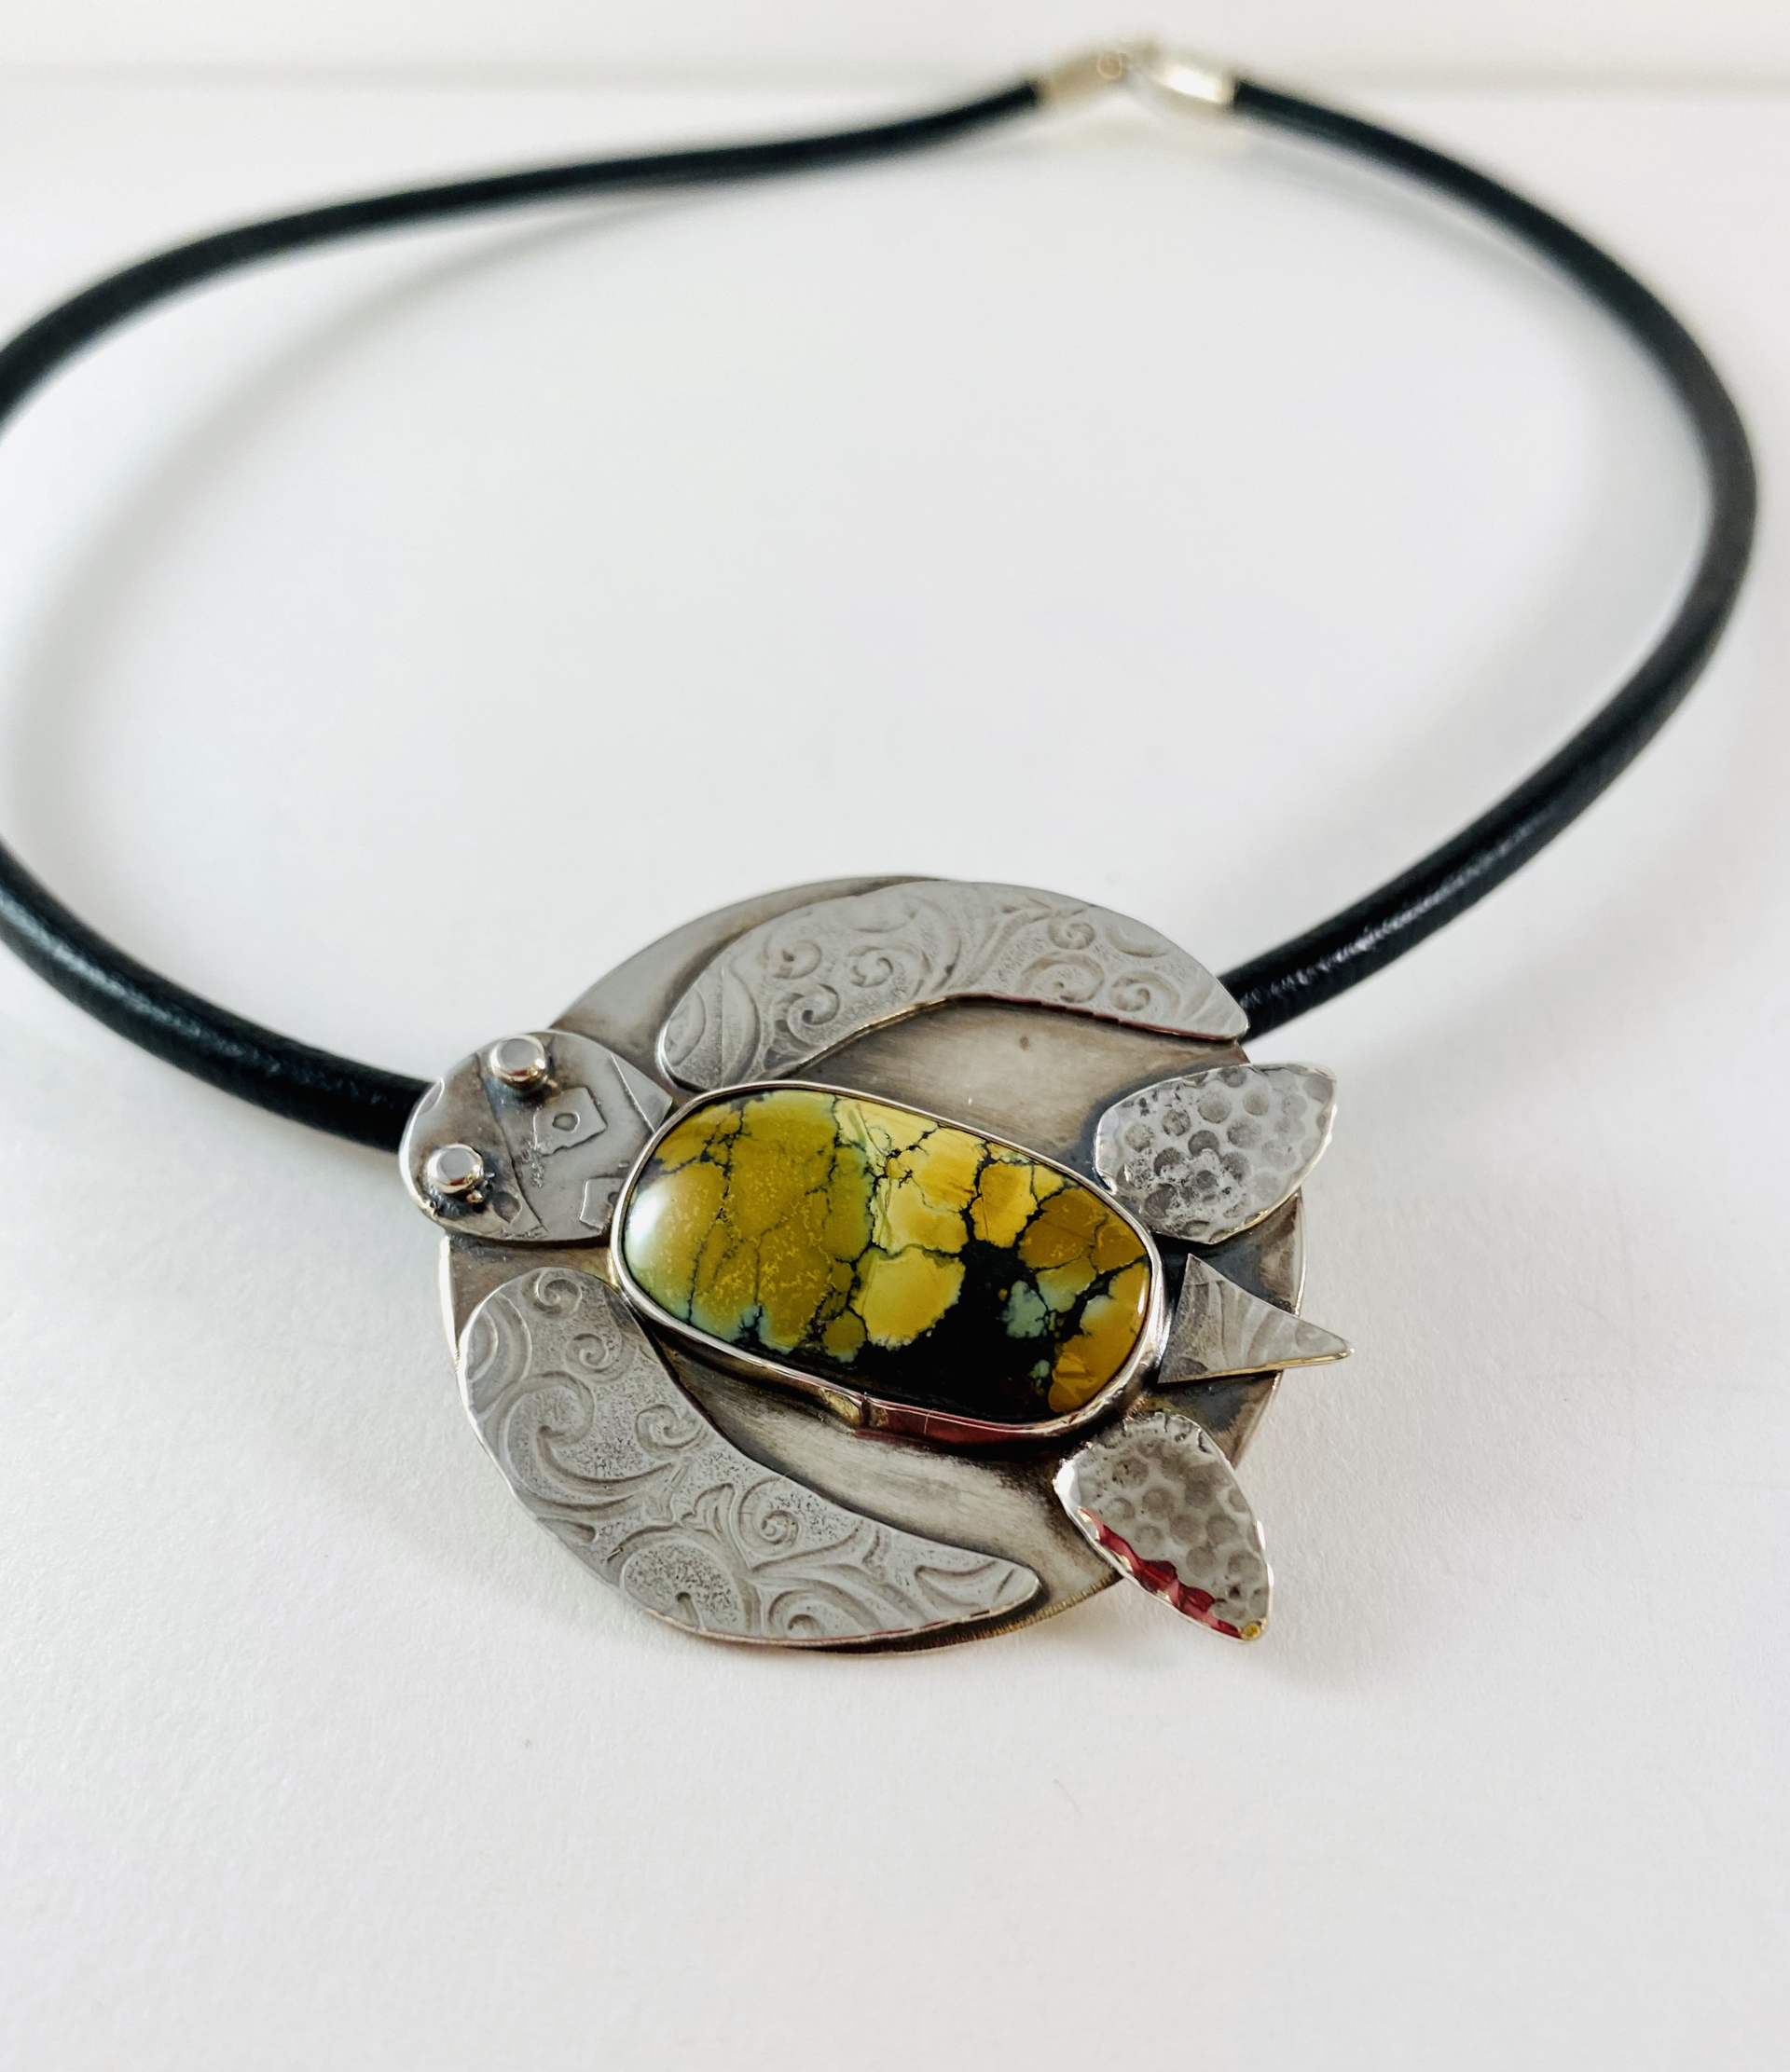 Sterling and Turquoise Turtle Pendant on Leather Cord Necklace AB20-3 by Anne Bivens